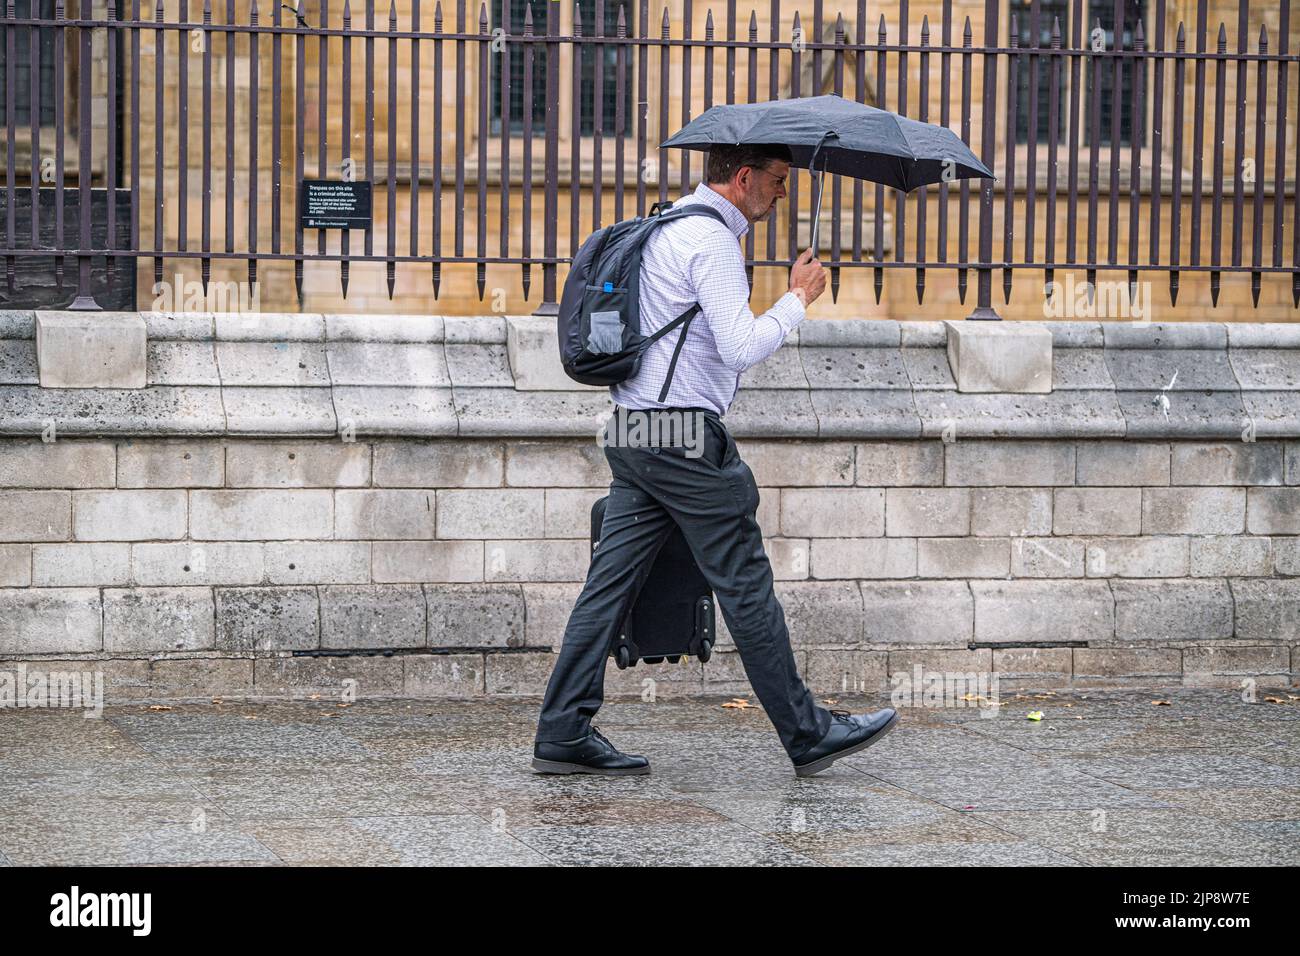 Westminster London, UK. 16 August 2022 . A pedestrian shelters with an umbrella as he walks outside parliament  during rain showers as the drought ends  after the prolonged dry spell and the driest summer in 46 years as the met office issues a yellow warning for thunderstorms and flash floods . Credit. amer ghazzal/Alamy Live News Stock Photo